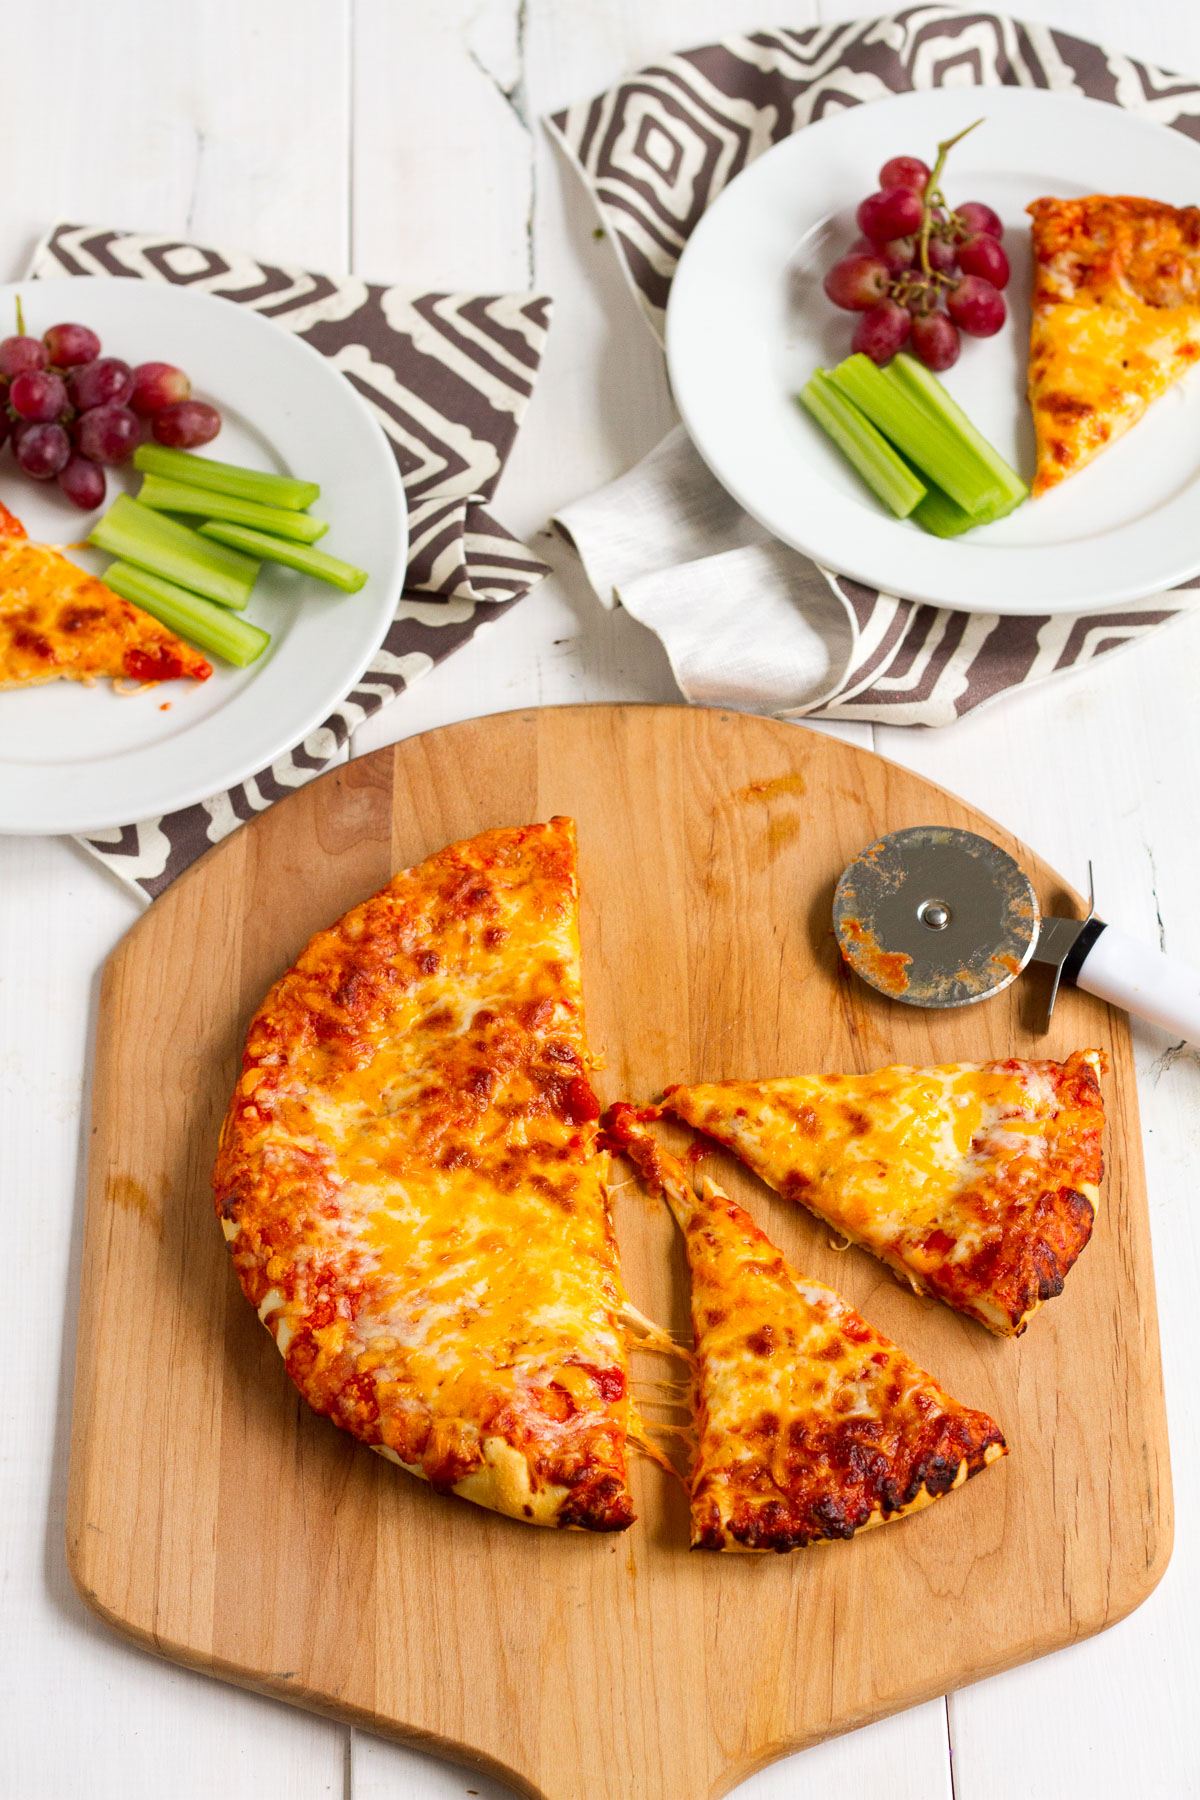 When we have a really busy weeknight come up, or we need a quick and easy dinner that the babysitter can fix for the kids, DiGiorno Cheese Stuffed Crust Five Cheese Pizza is our go-to! Everyone loves it, and the crust is preservative free. Paired with a side salad or cut up fruits and veggies, it makes a wholesome and deliciously easy dinner.